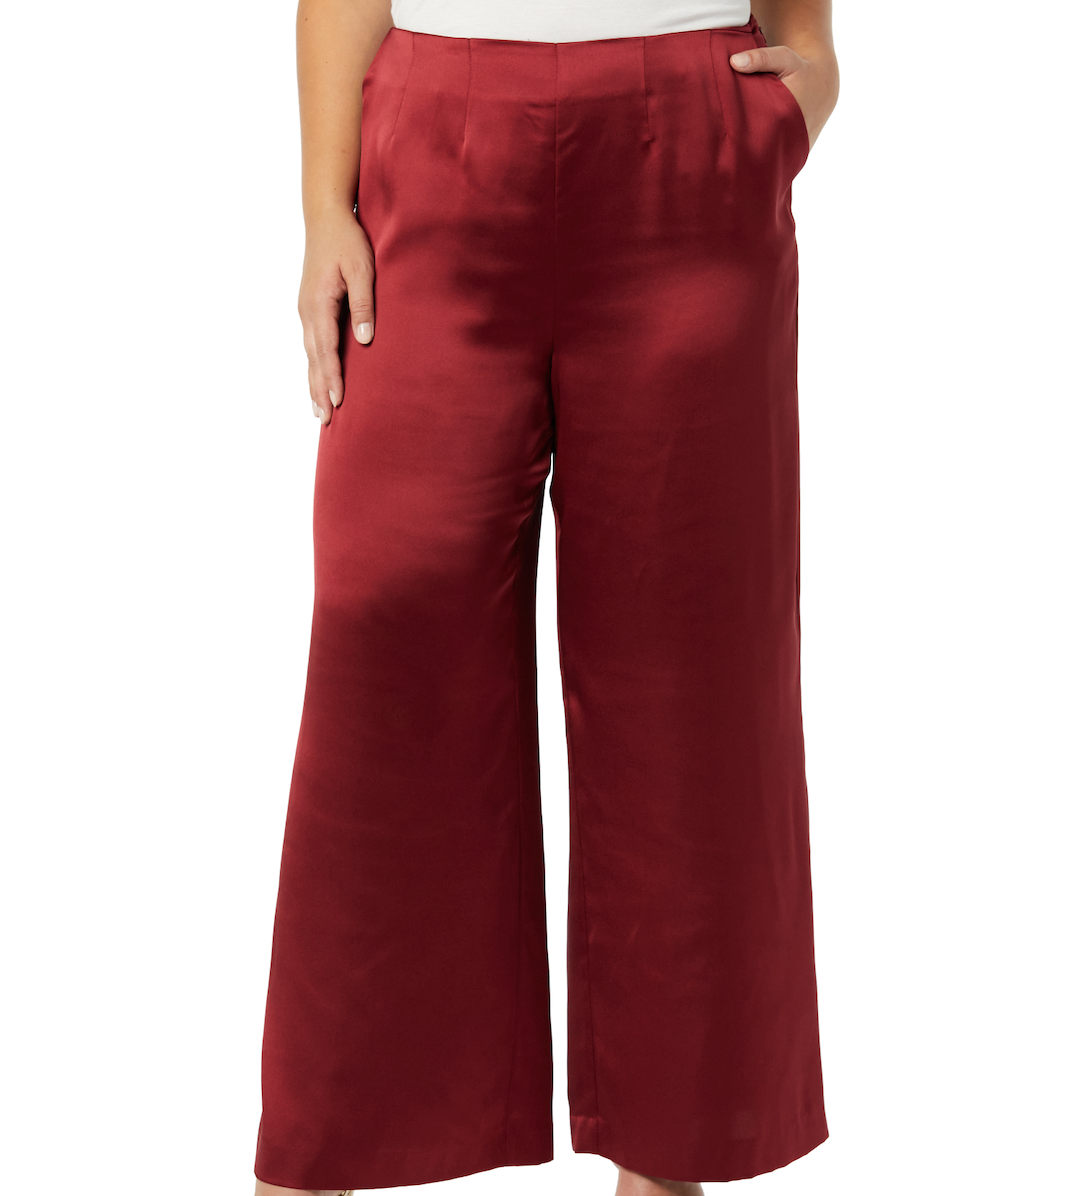 Satin Wide Leg Pant Inspired by Jeanette's Winning Look